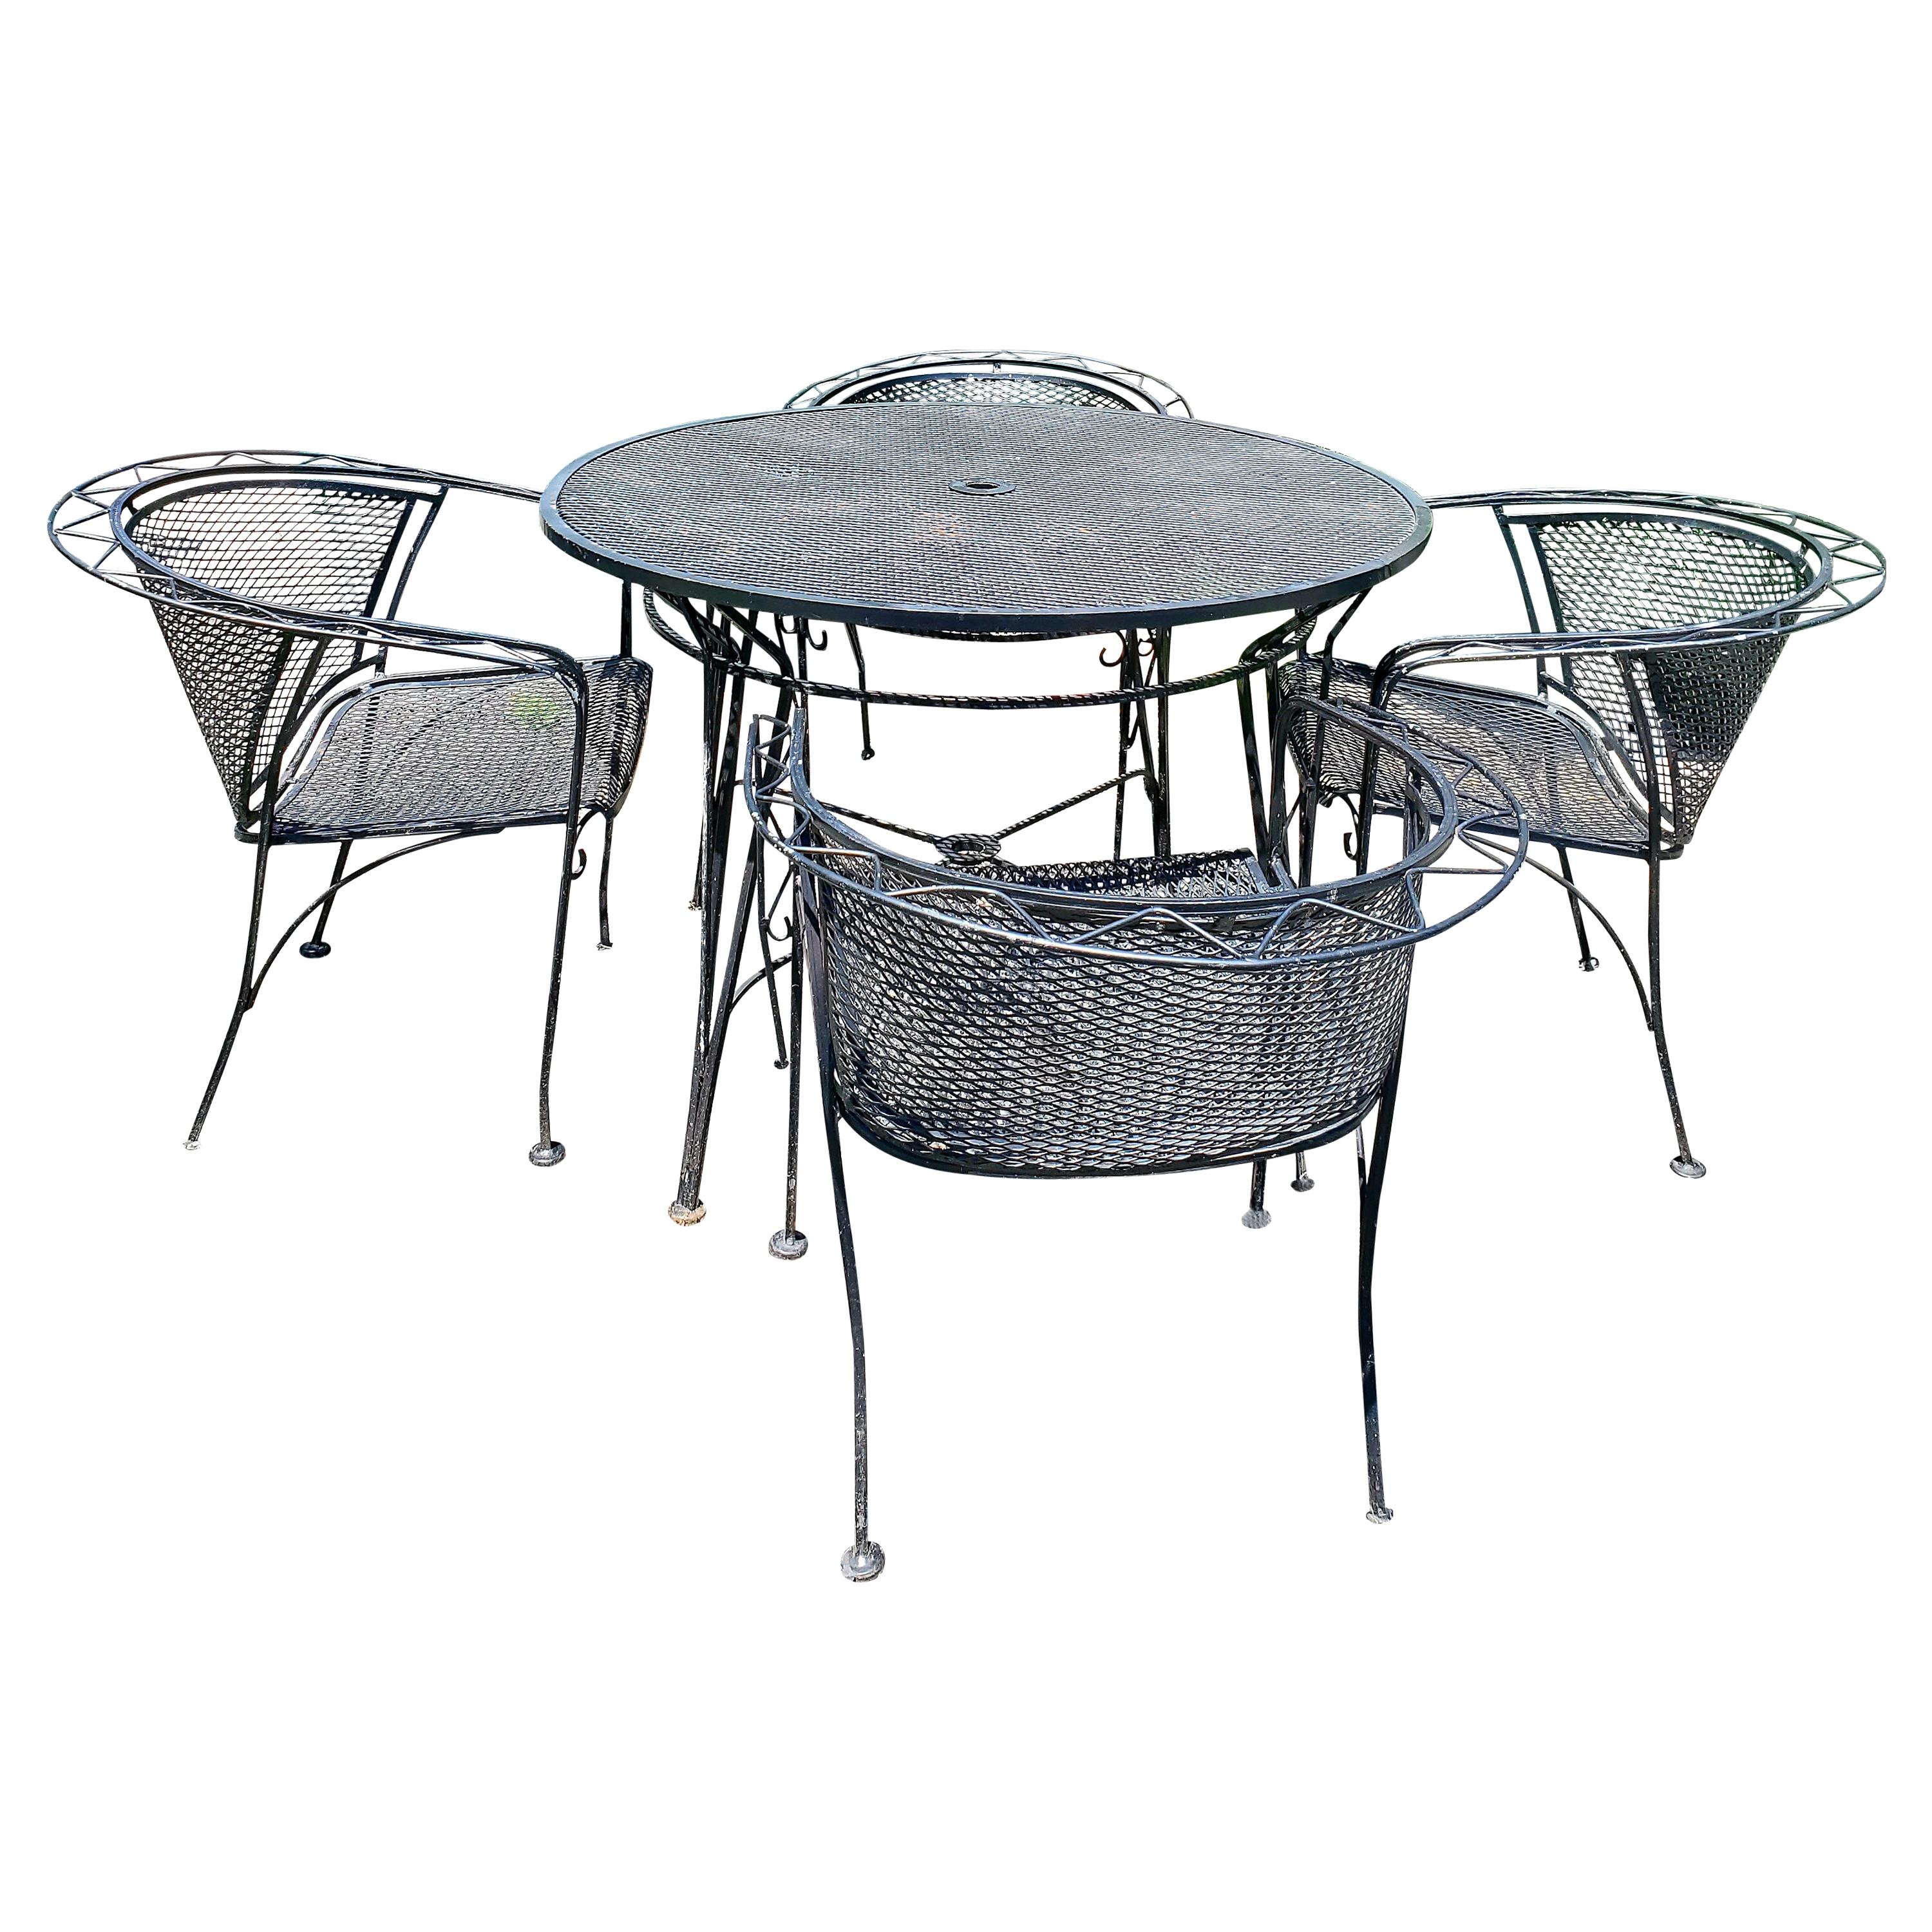 Classic Black Iron Mid-Century Modern Outdoor Dining Table and Chairs